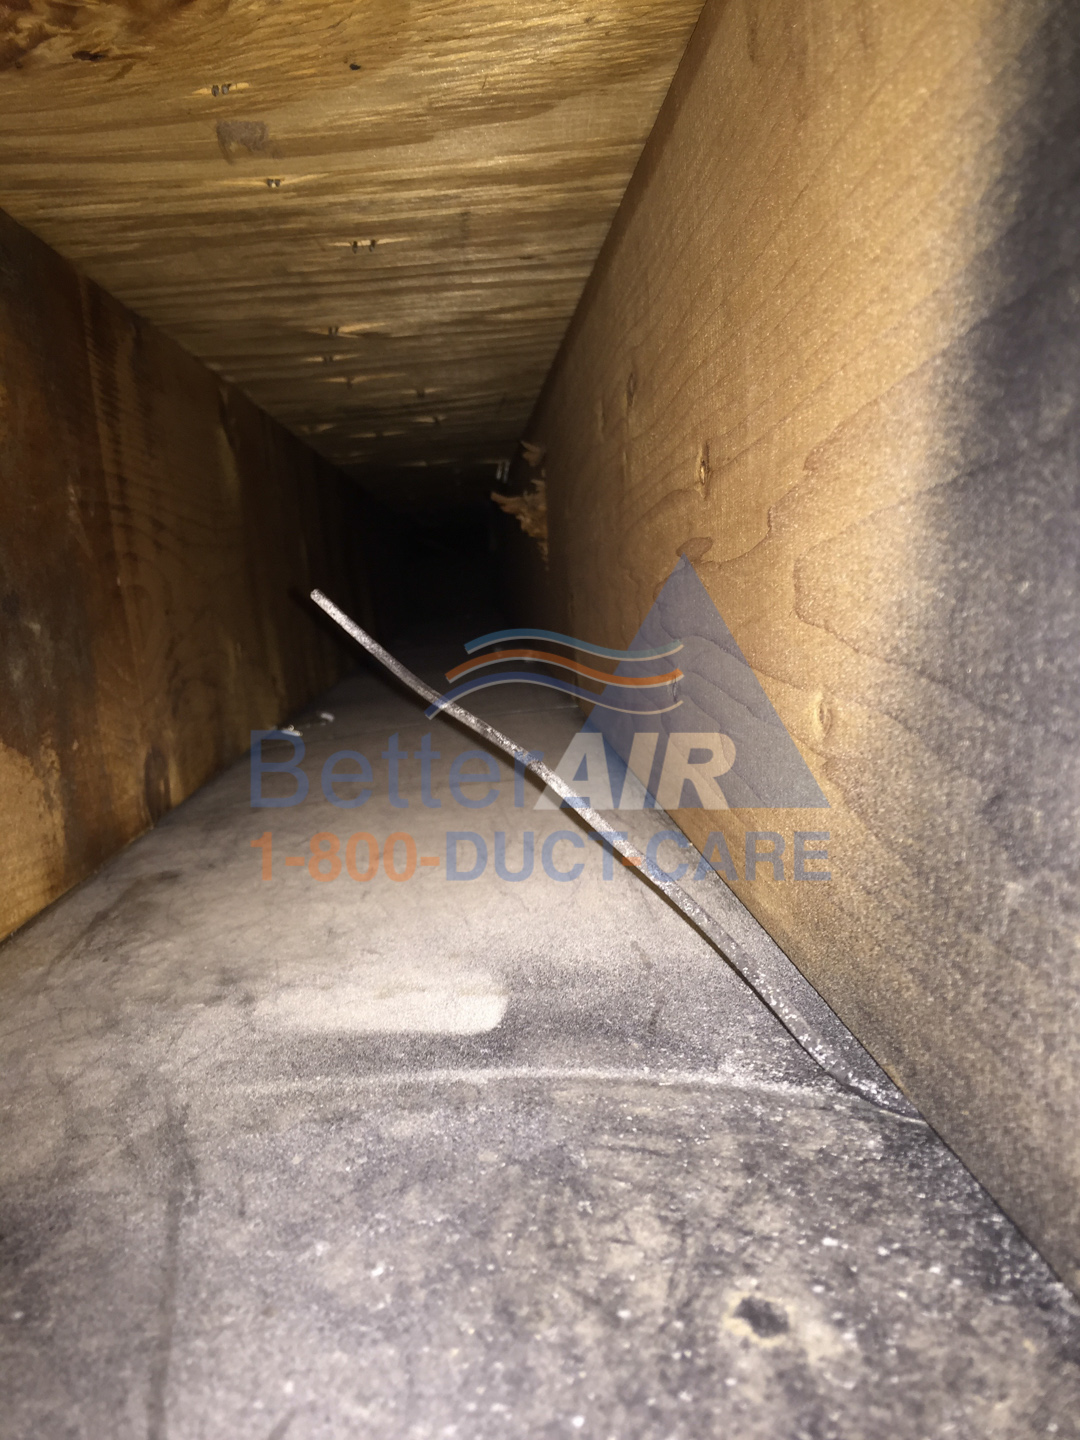 Air Duct Cleaning Massachusetts Duct & Dryer Vent Cleaning Boston MA